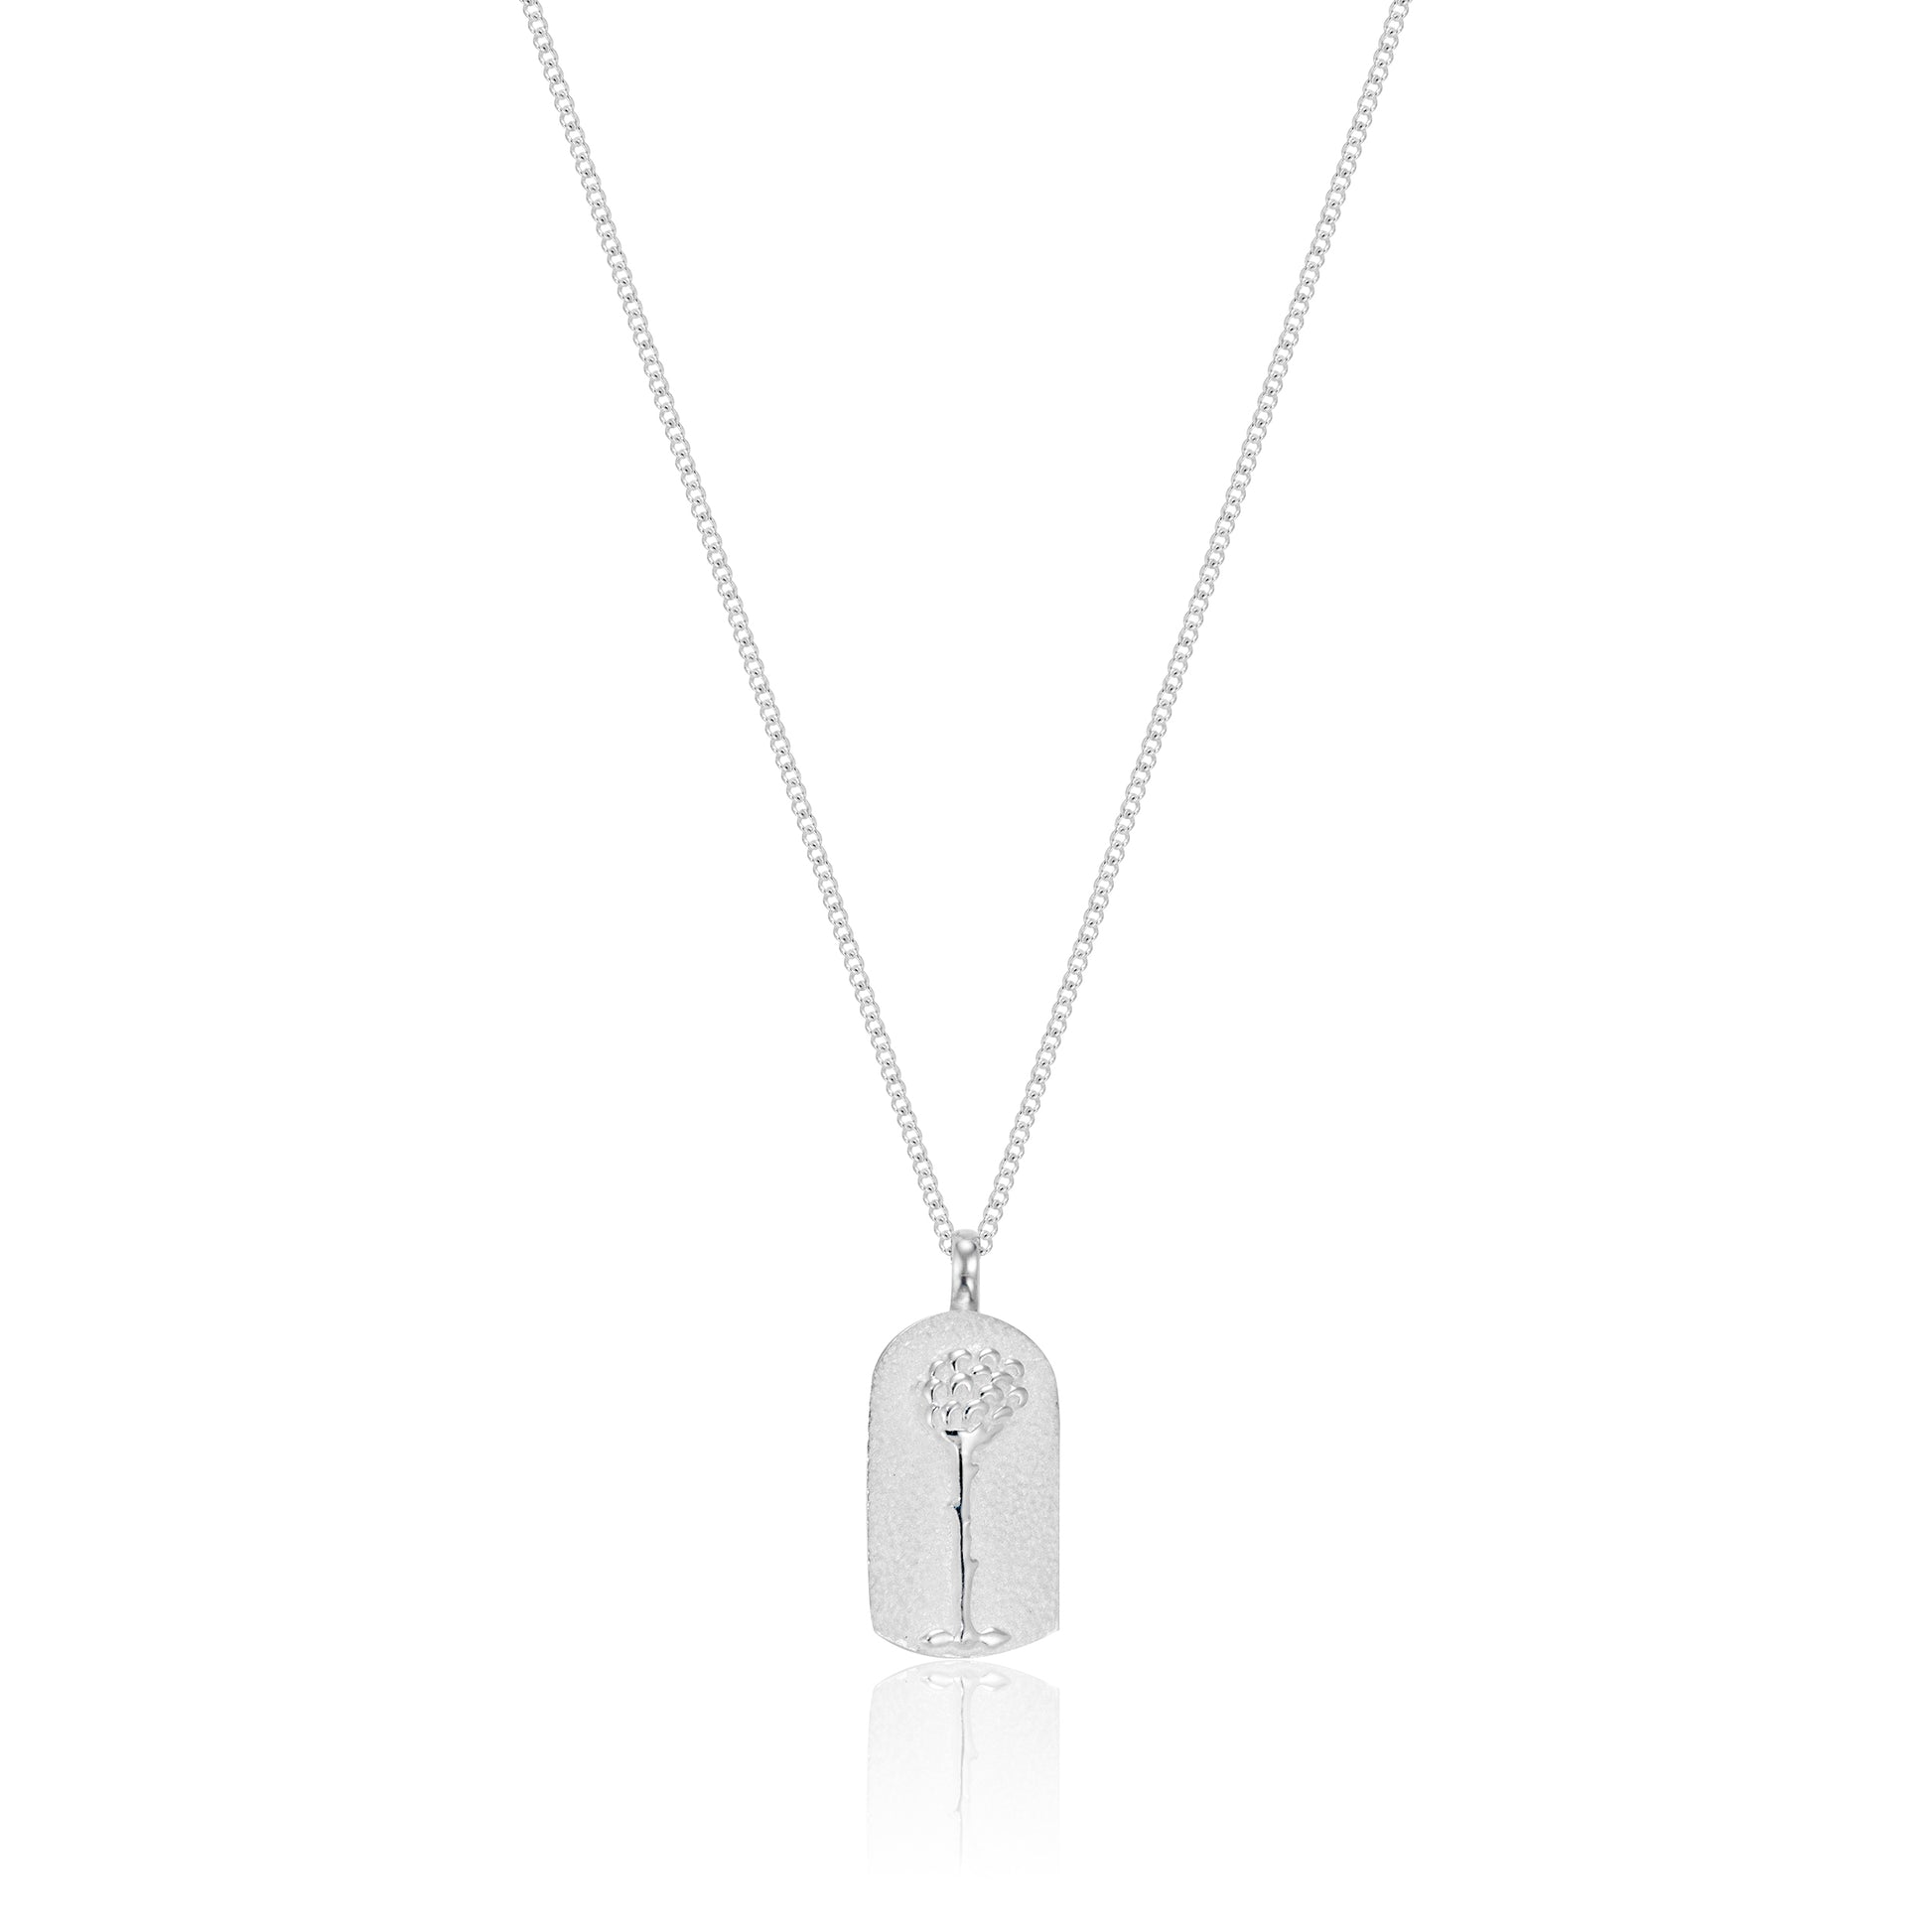 La Rose Charm Necklace from Serena Van Rensselaer x Le Petit Prince© Collection